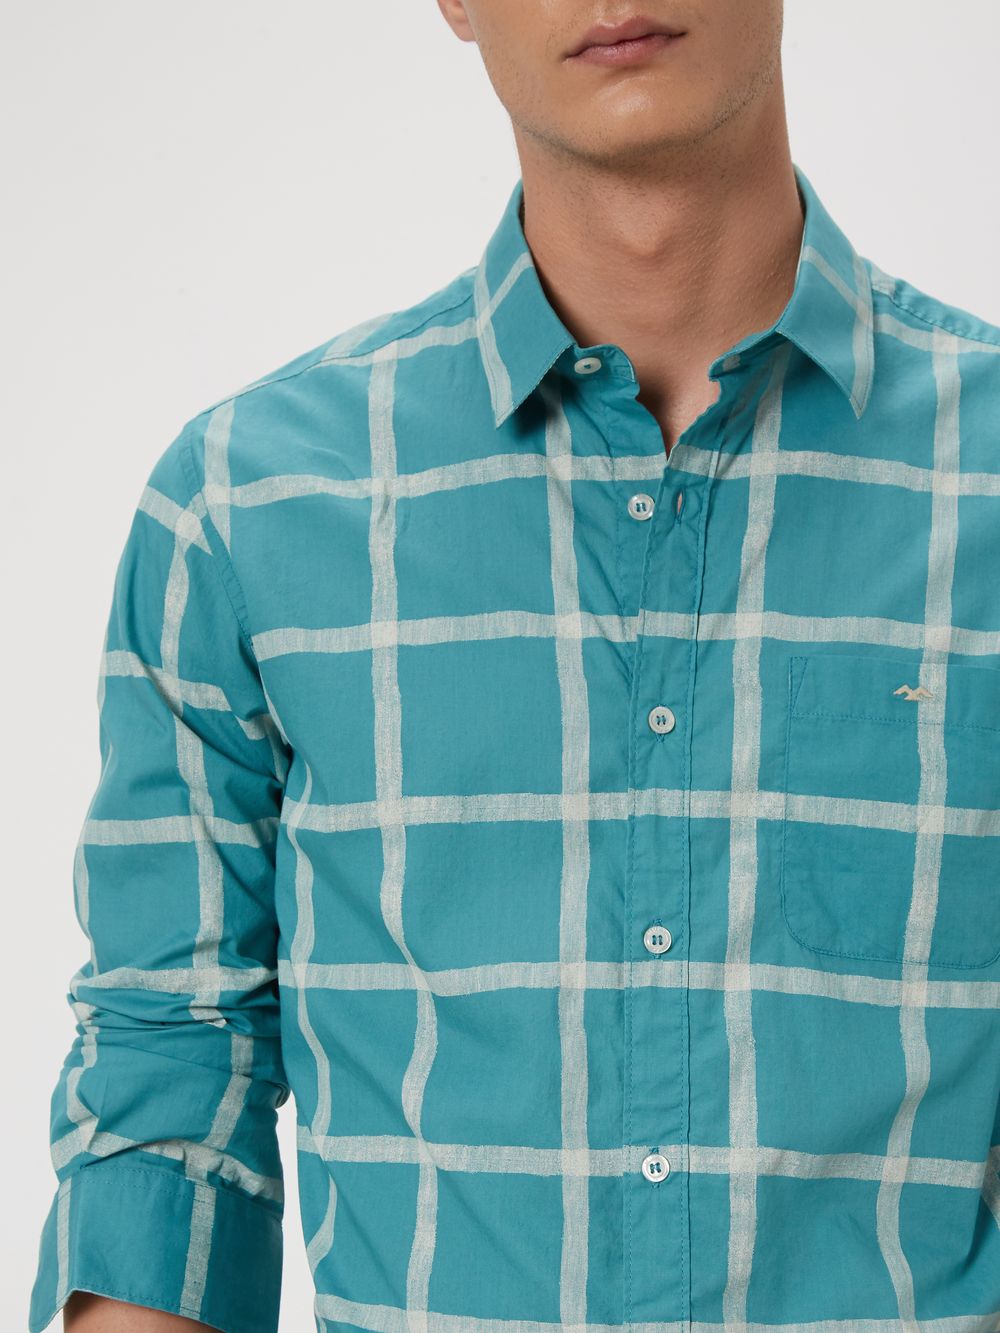 Turquoise & Off White Painted Check Lightweight Shirt